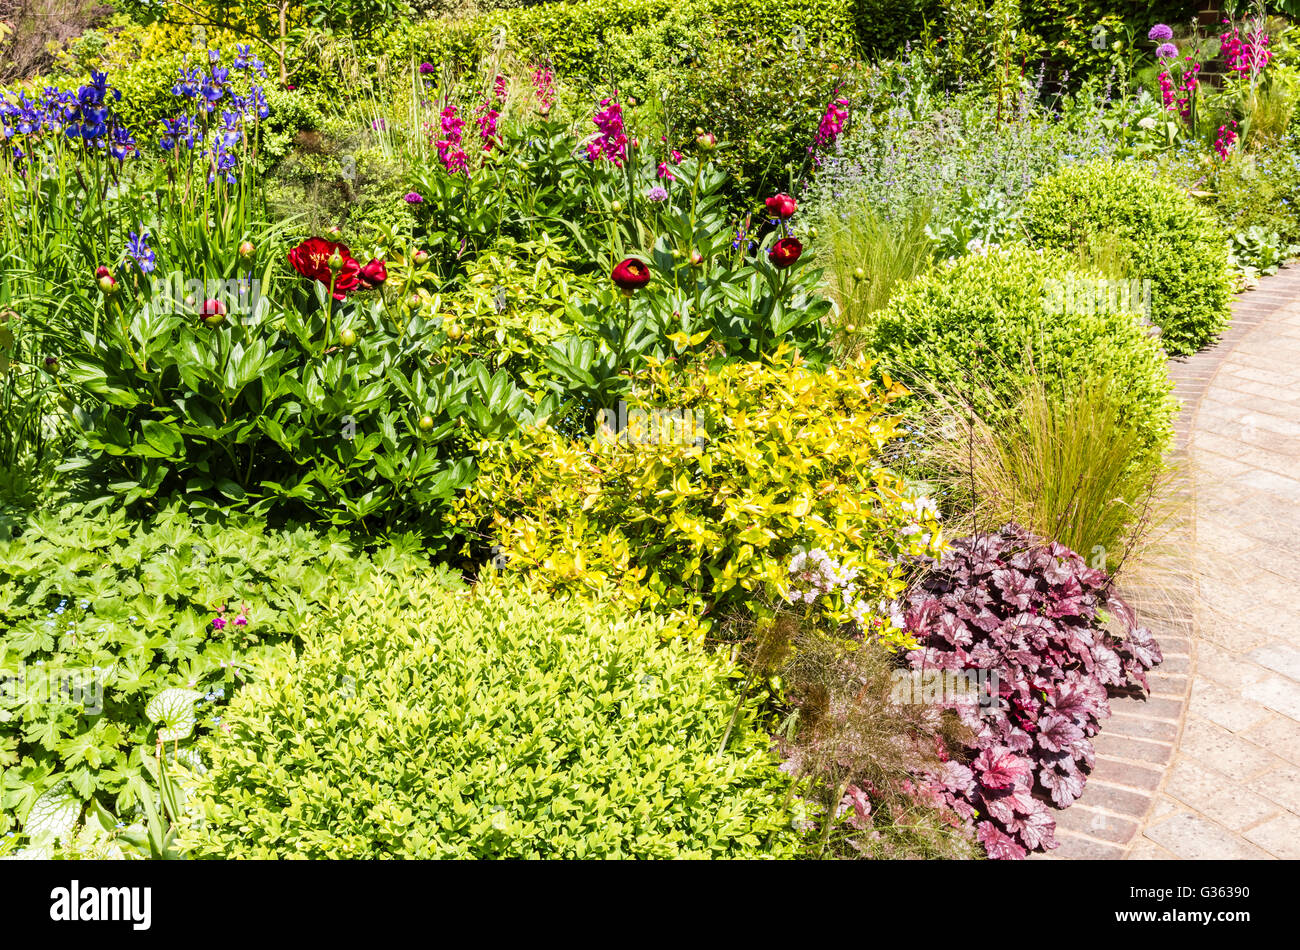 fWonderful display of flowers caught in the spring sun of a north London garden, UK. Stock Photo